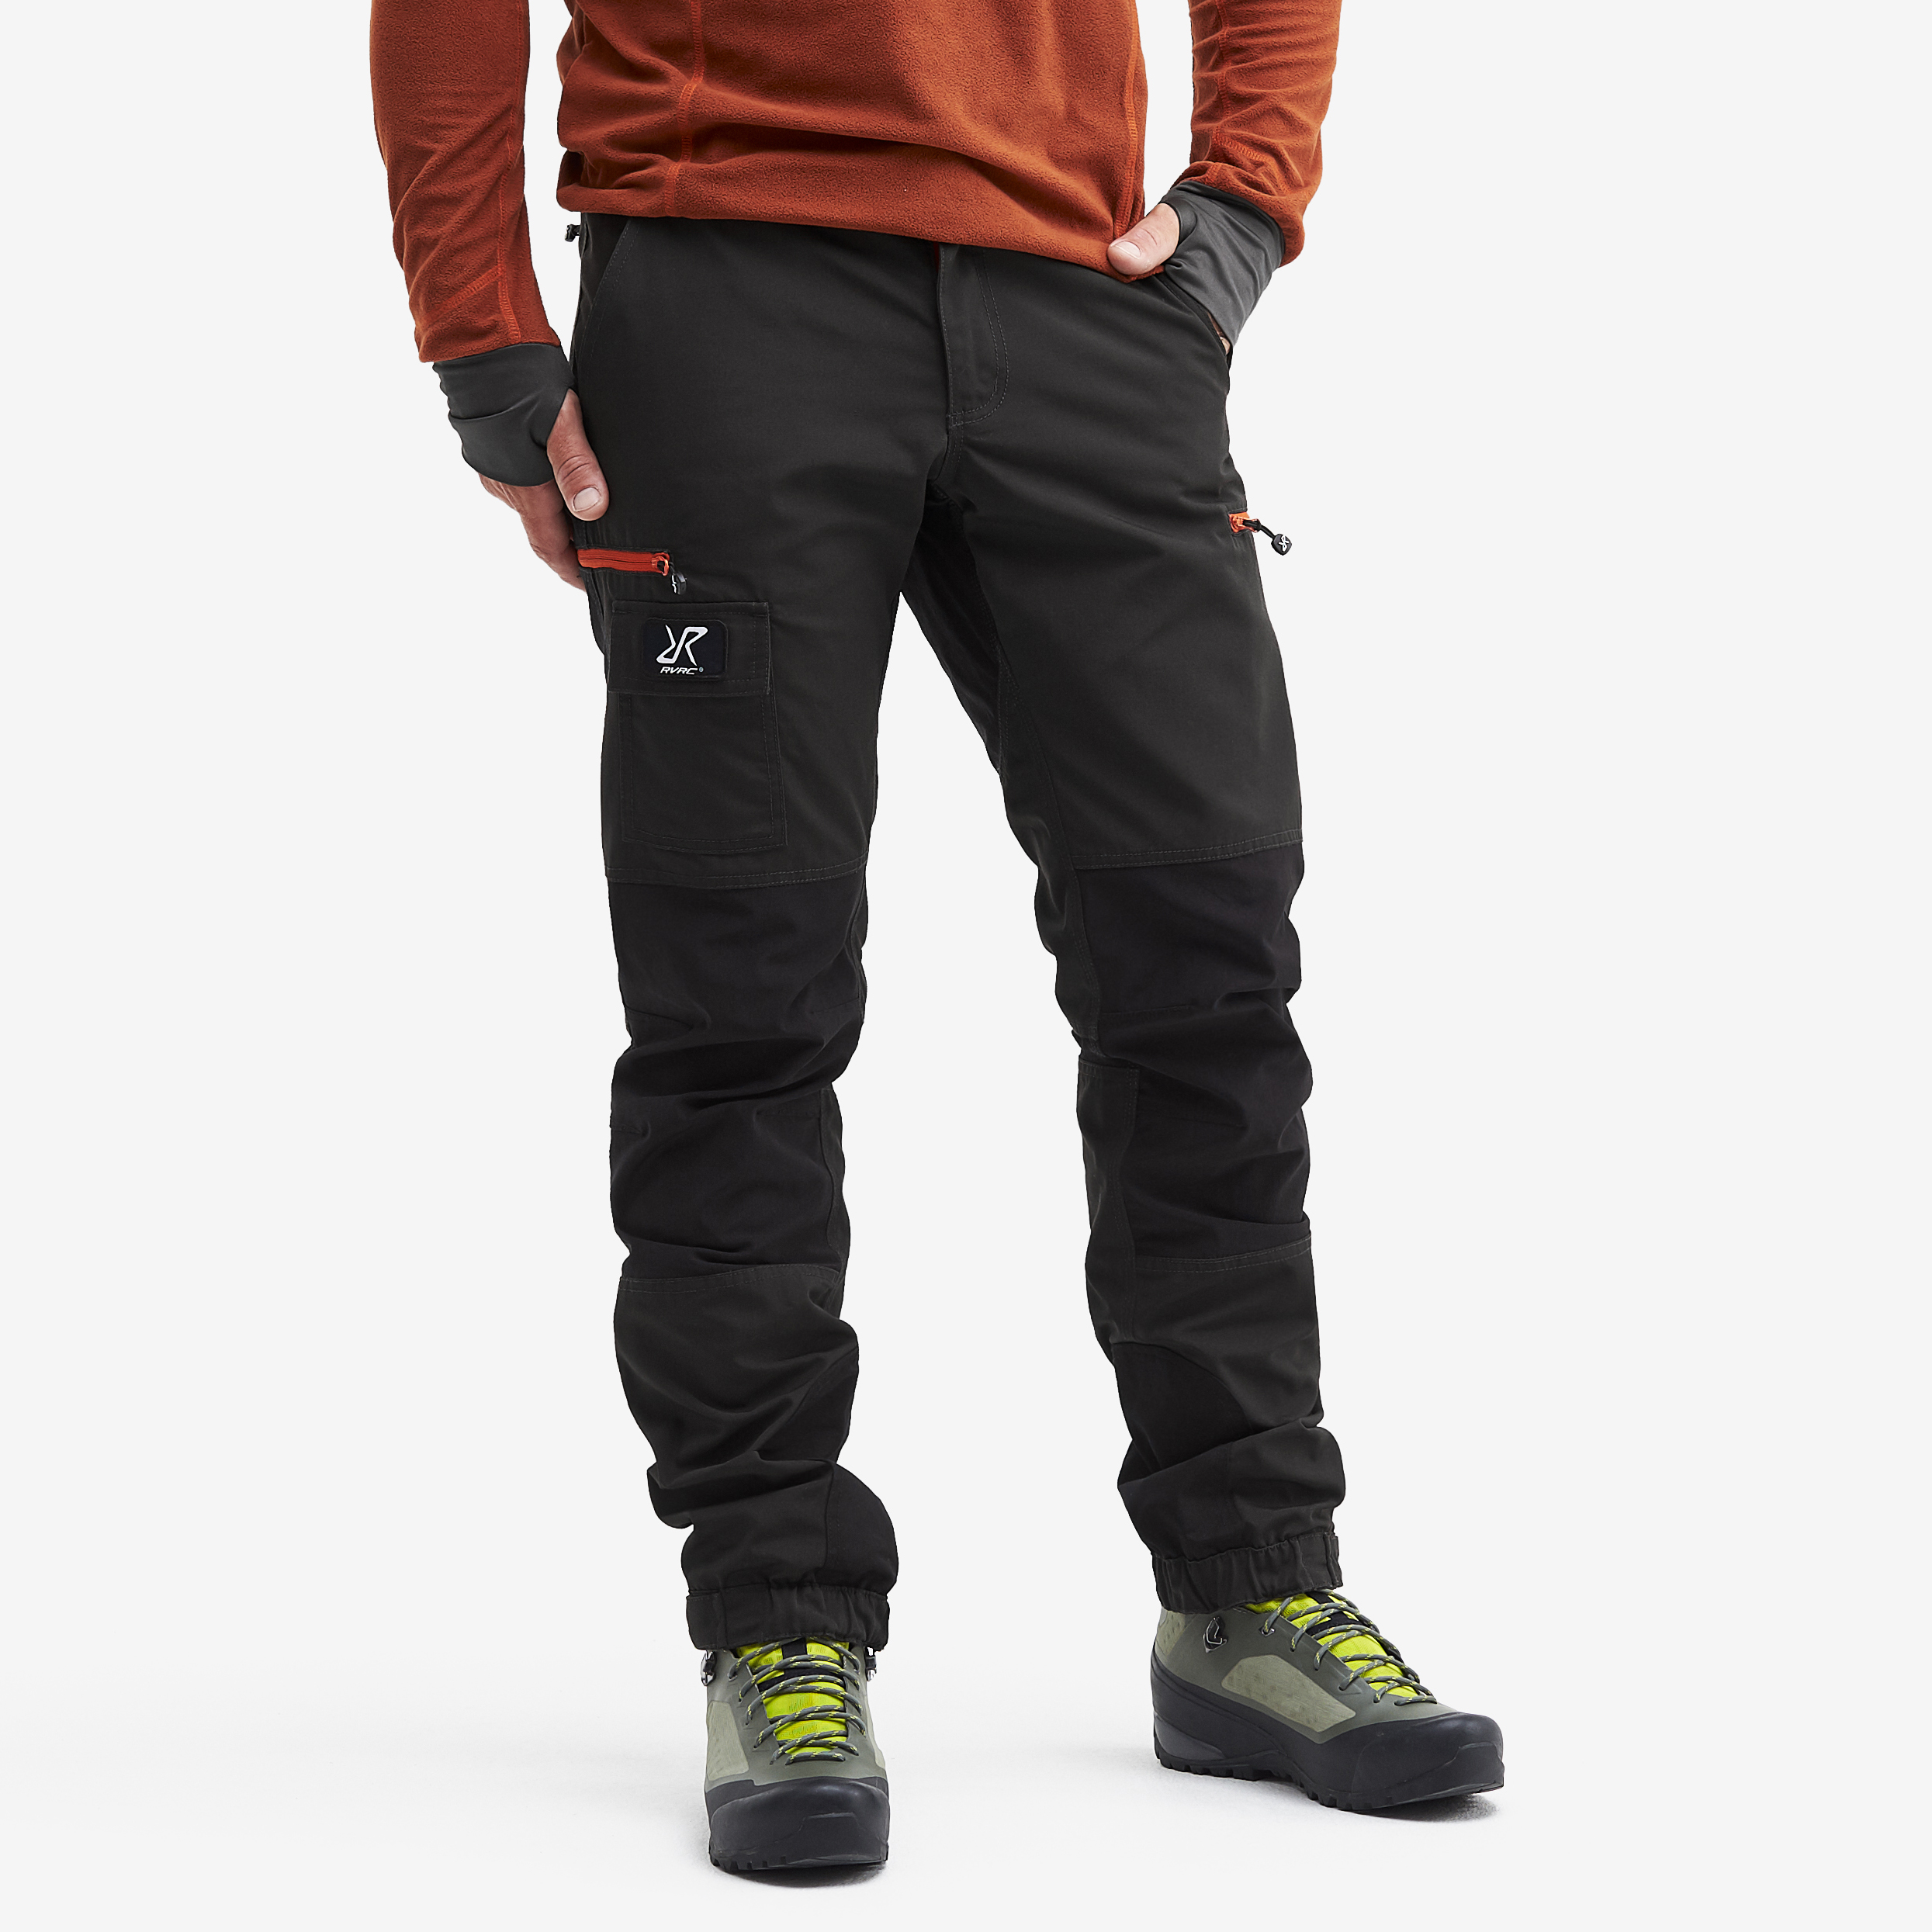 Nordwand Pants Anthracite/Autumn Herre